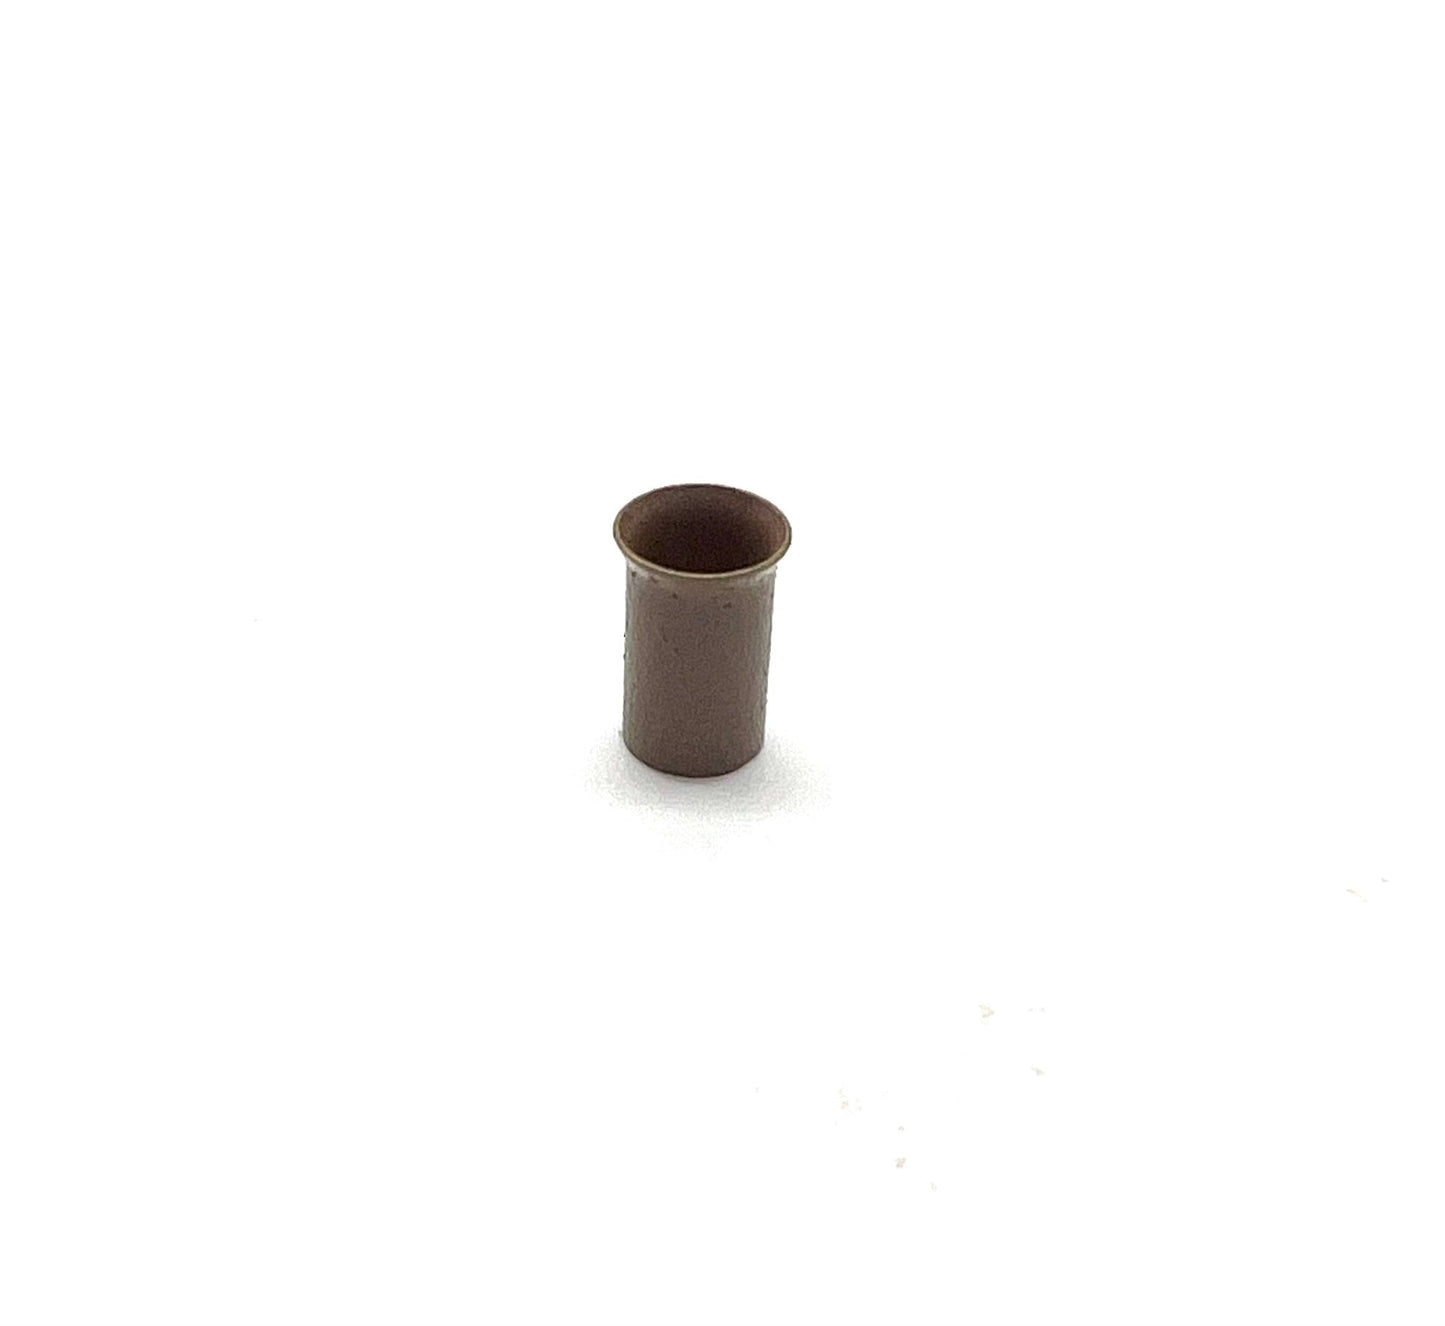 Copper Micro Link Style D - Size 3.4 x 3.0 x  6.00  mm 1 bottle (1000 pieces) - VIP Extensions